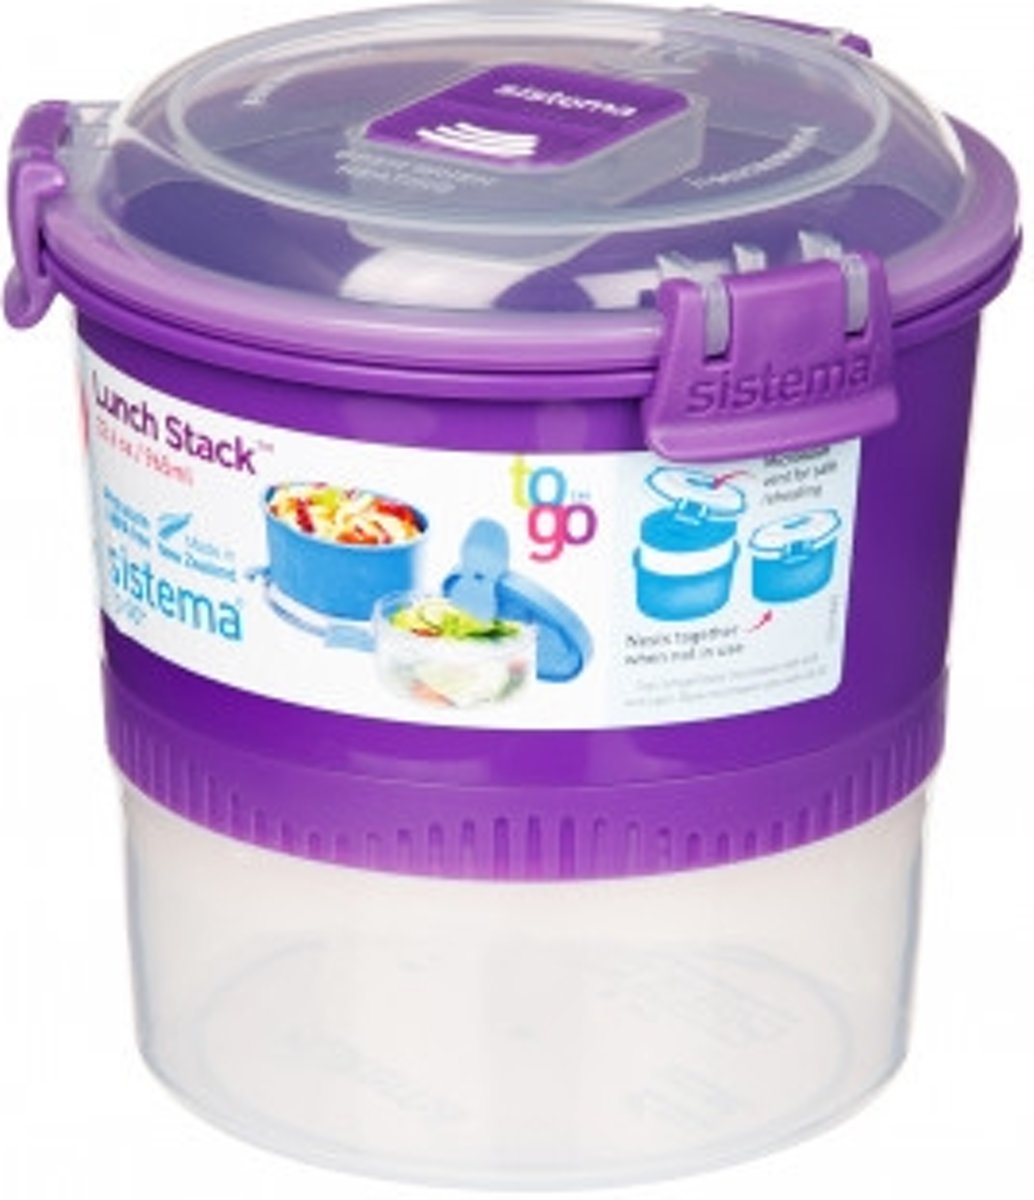 SISTEMA TO GO LUNCH STACK 965ML